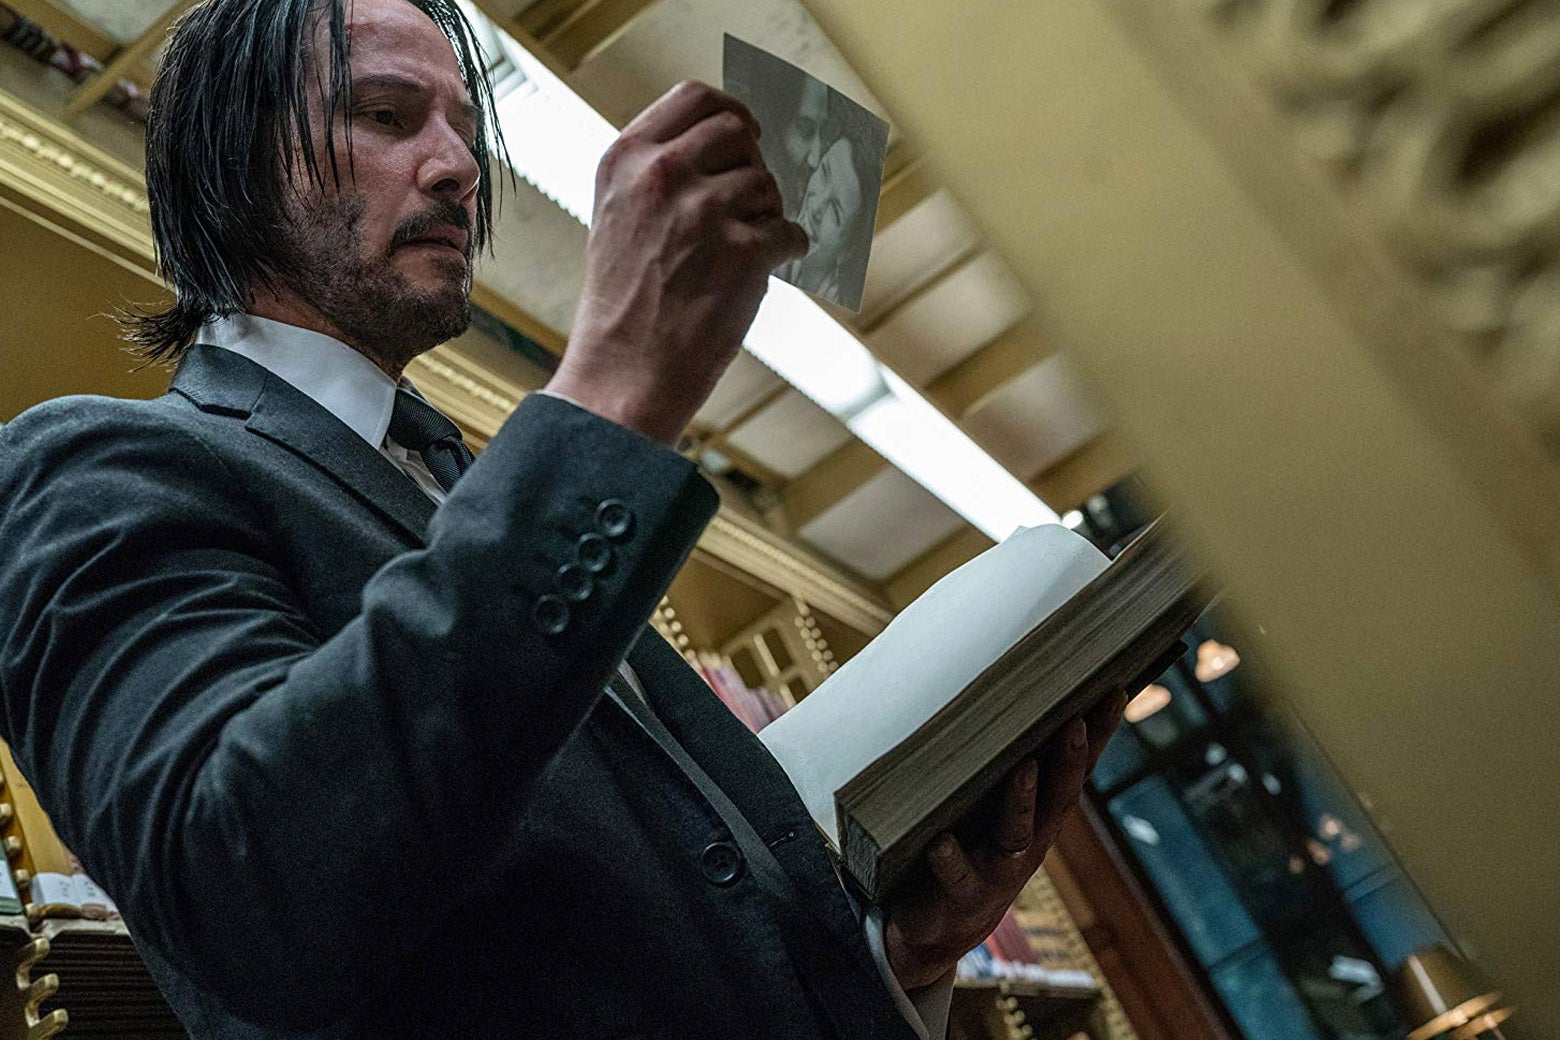 John Wick looks at a photo found inside a book, as he stands in the stacks of a library.